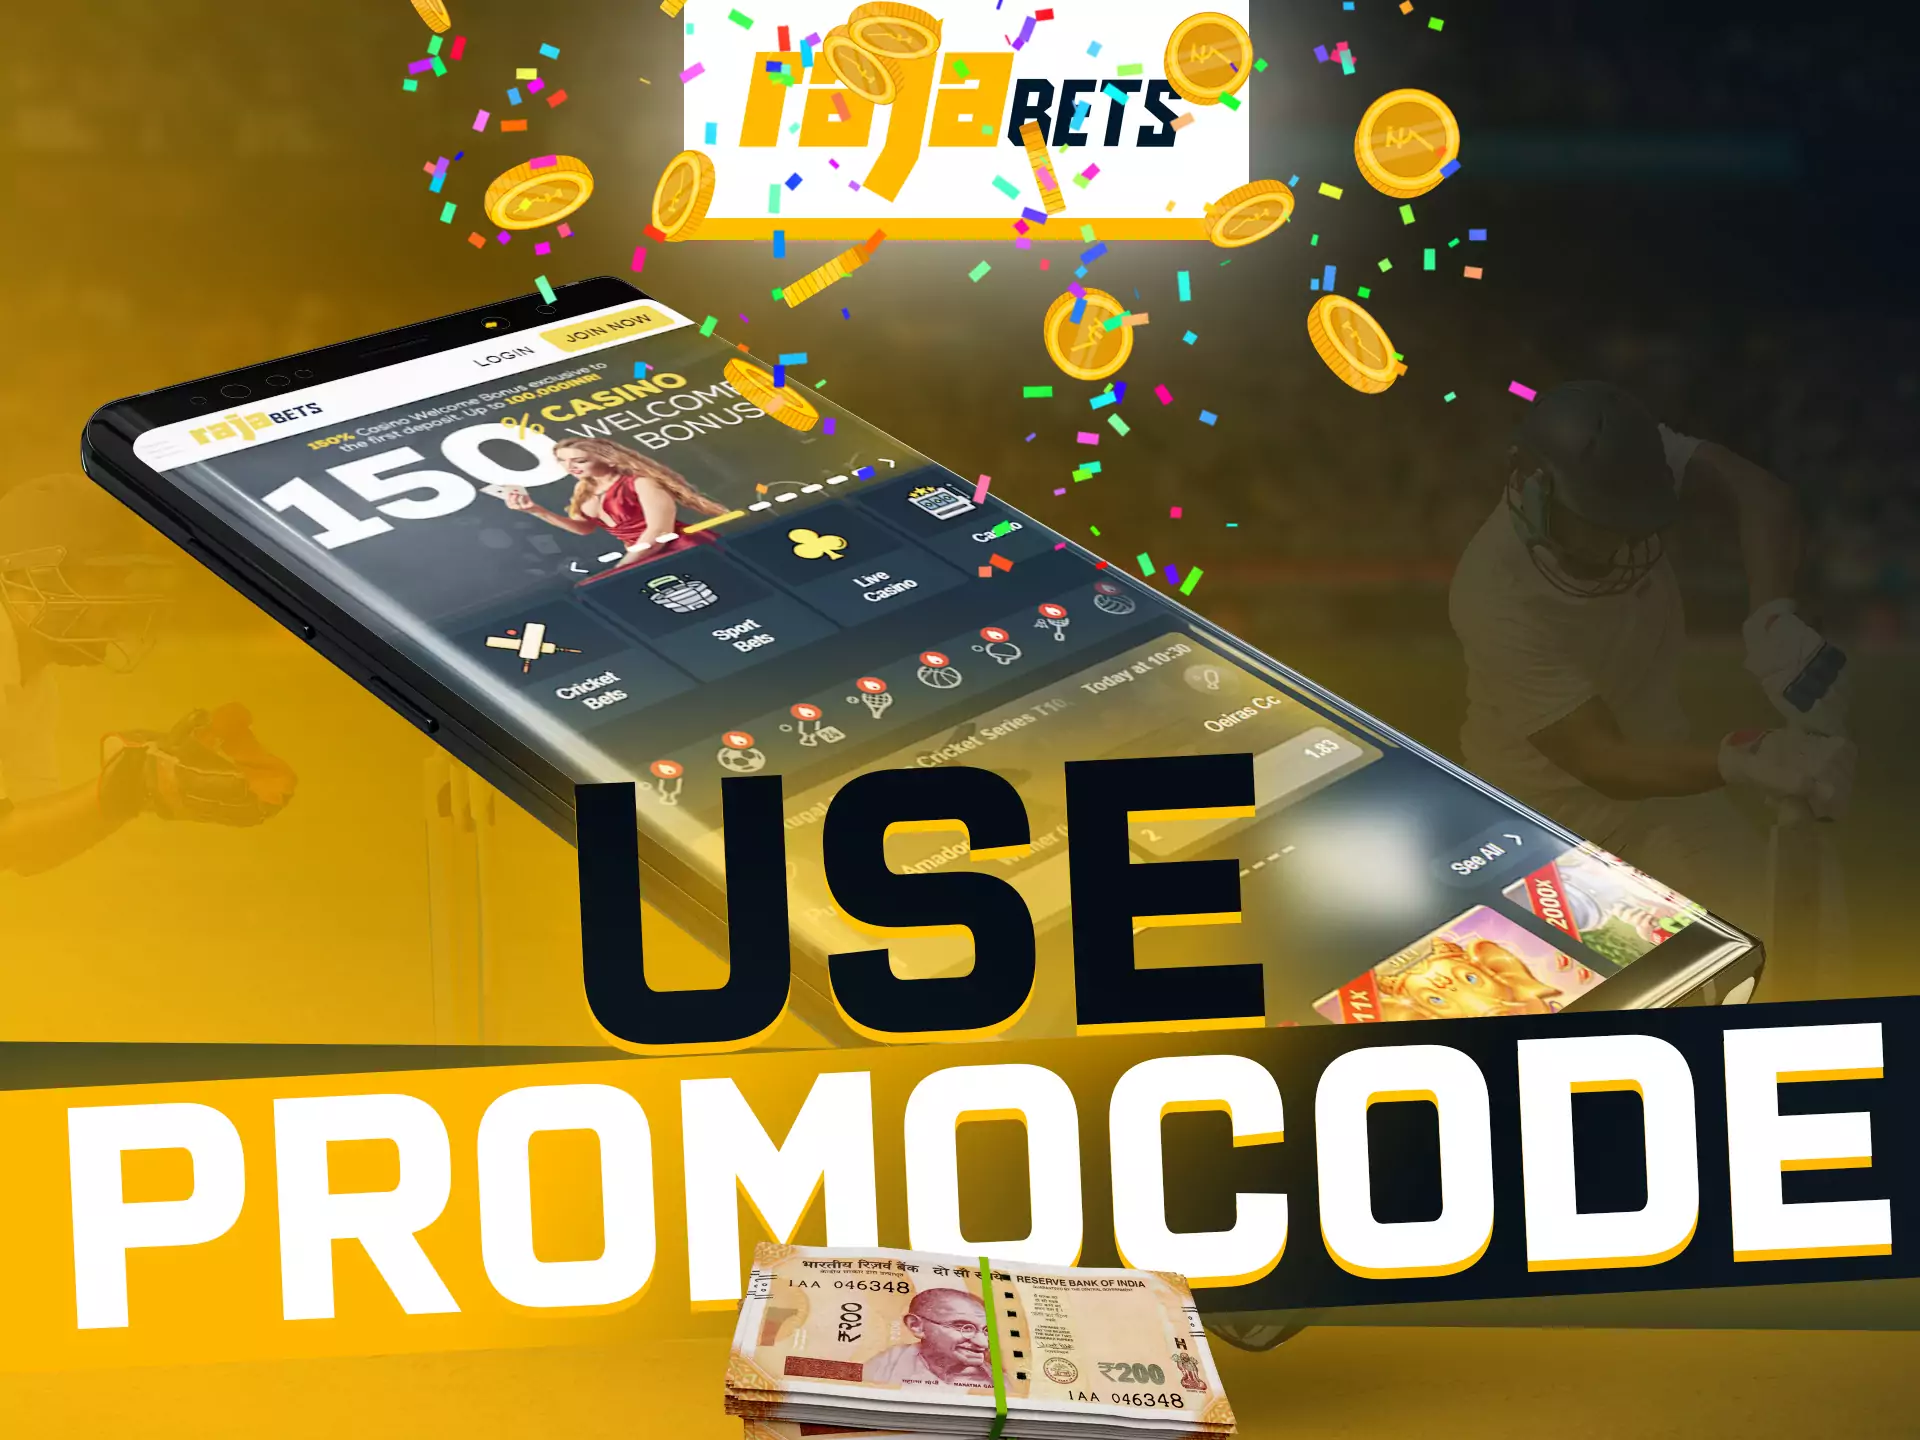 On Rajabets app, be sure to use a special promo code.